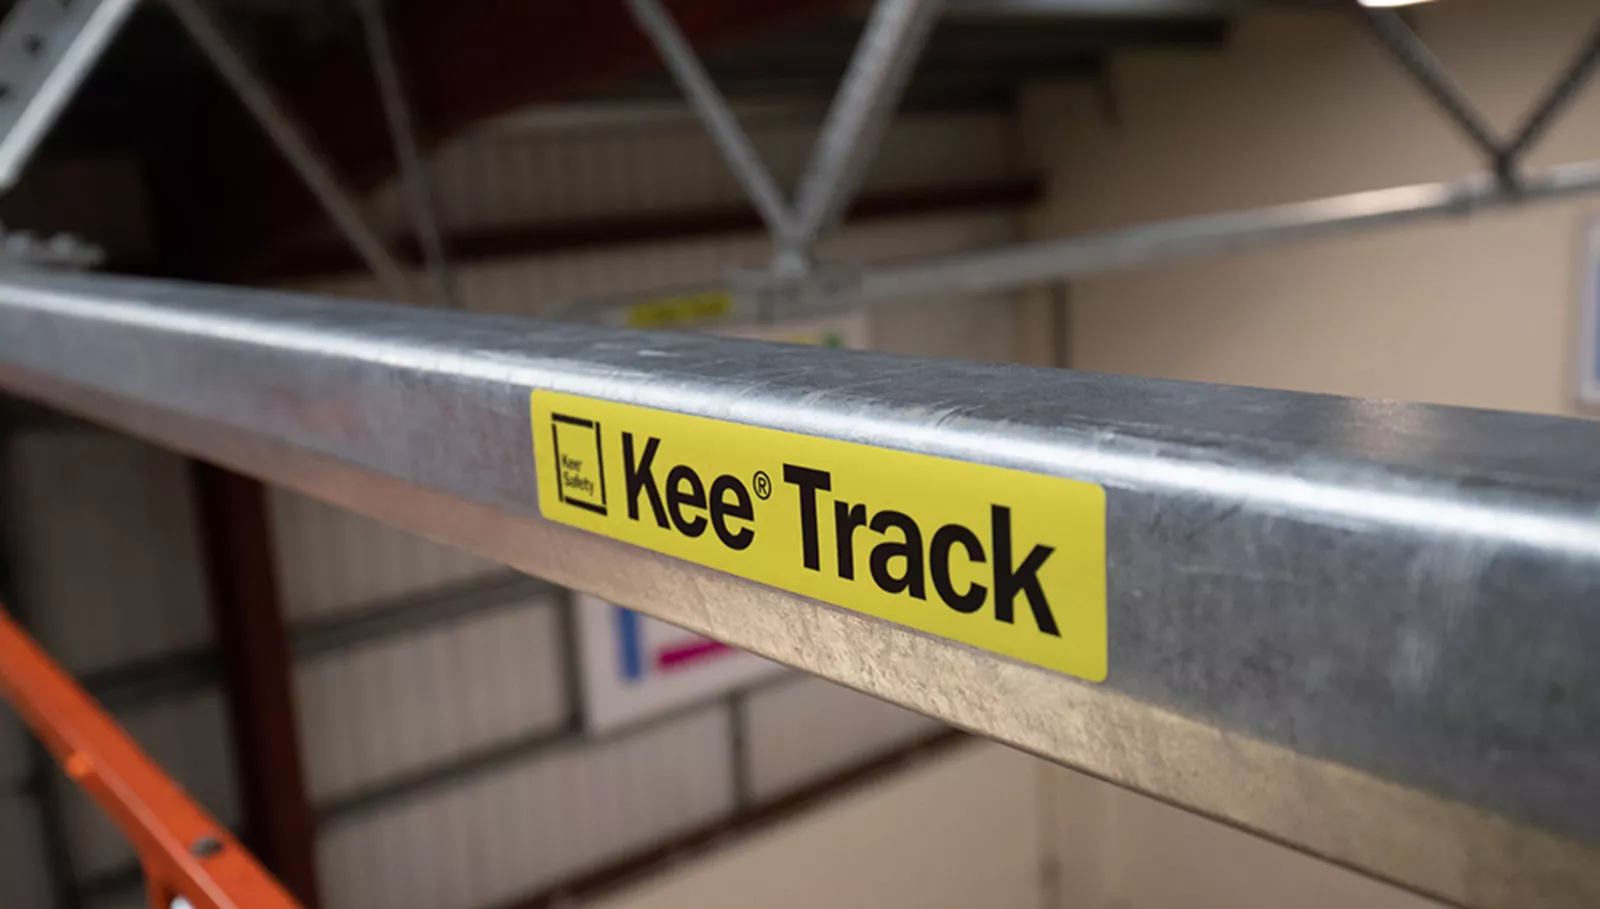 Kee Safety Launches Innovative Rigid Rail Product